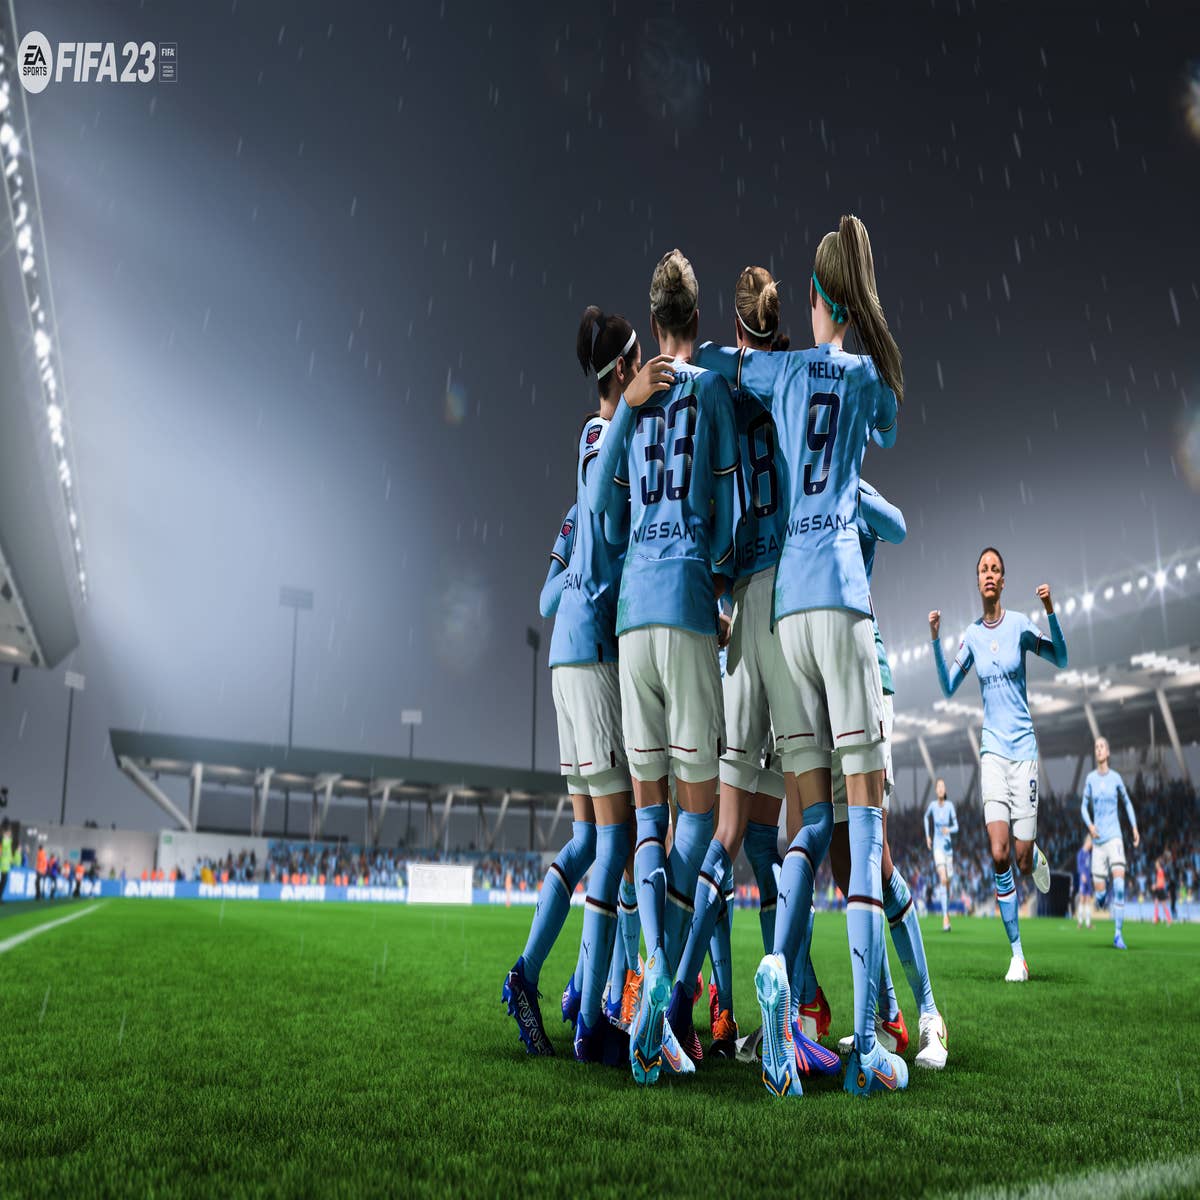 Is Football Manager 2023 crossplay? Find out here!